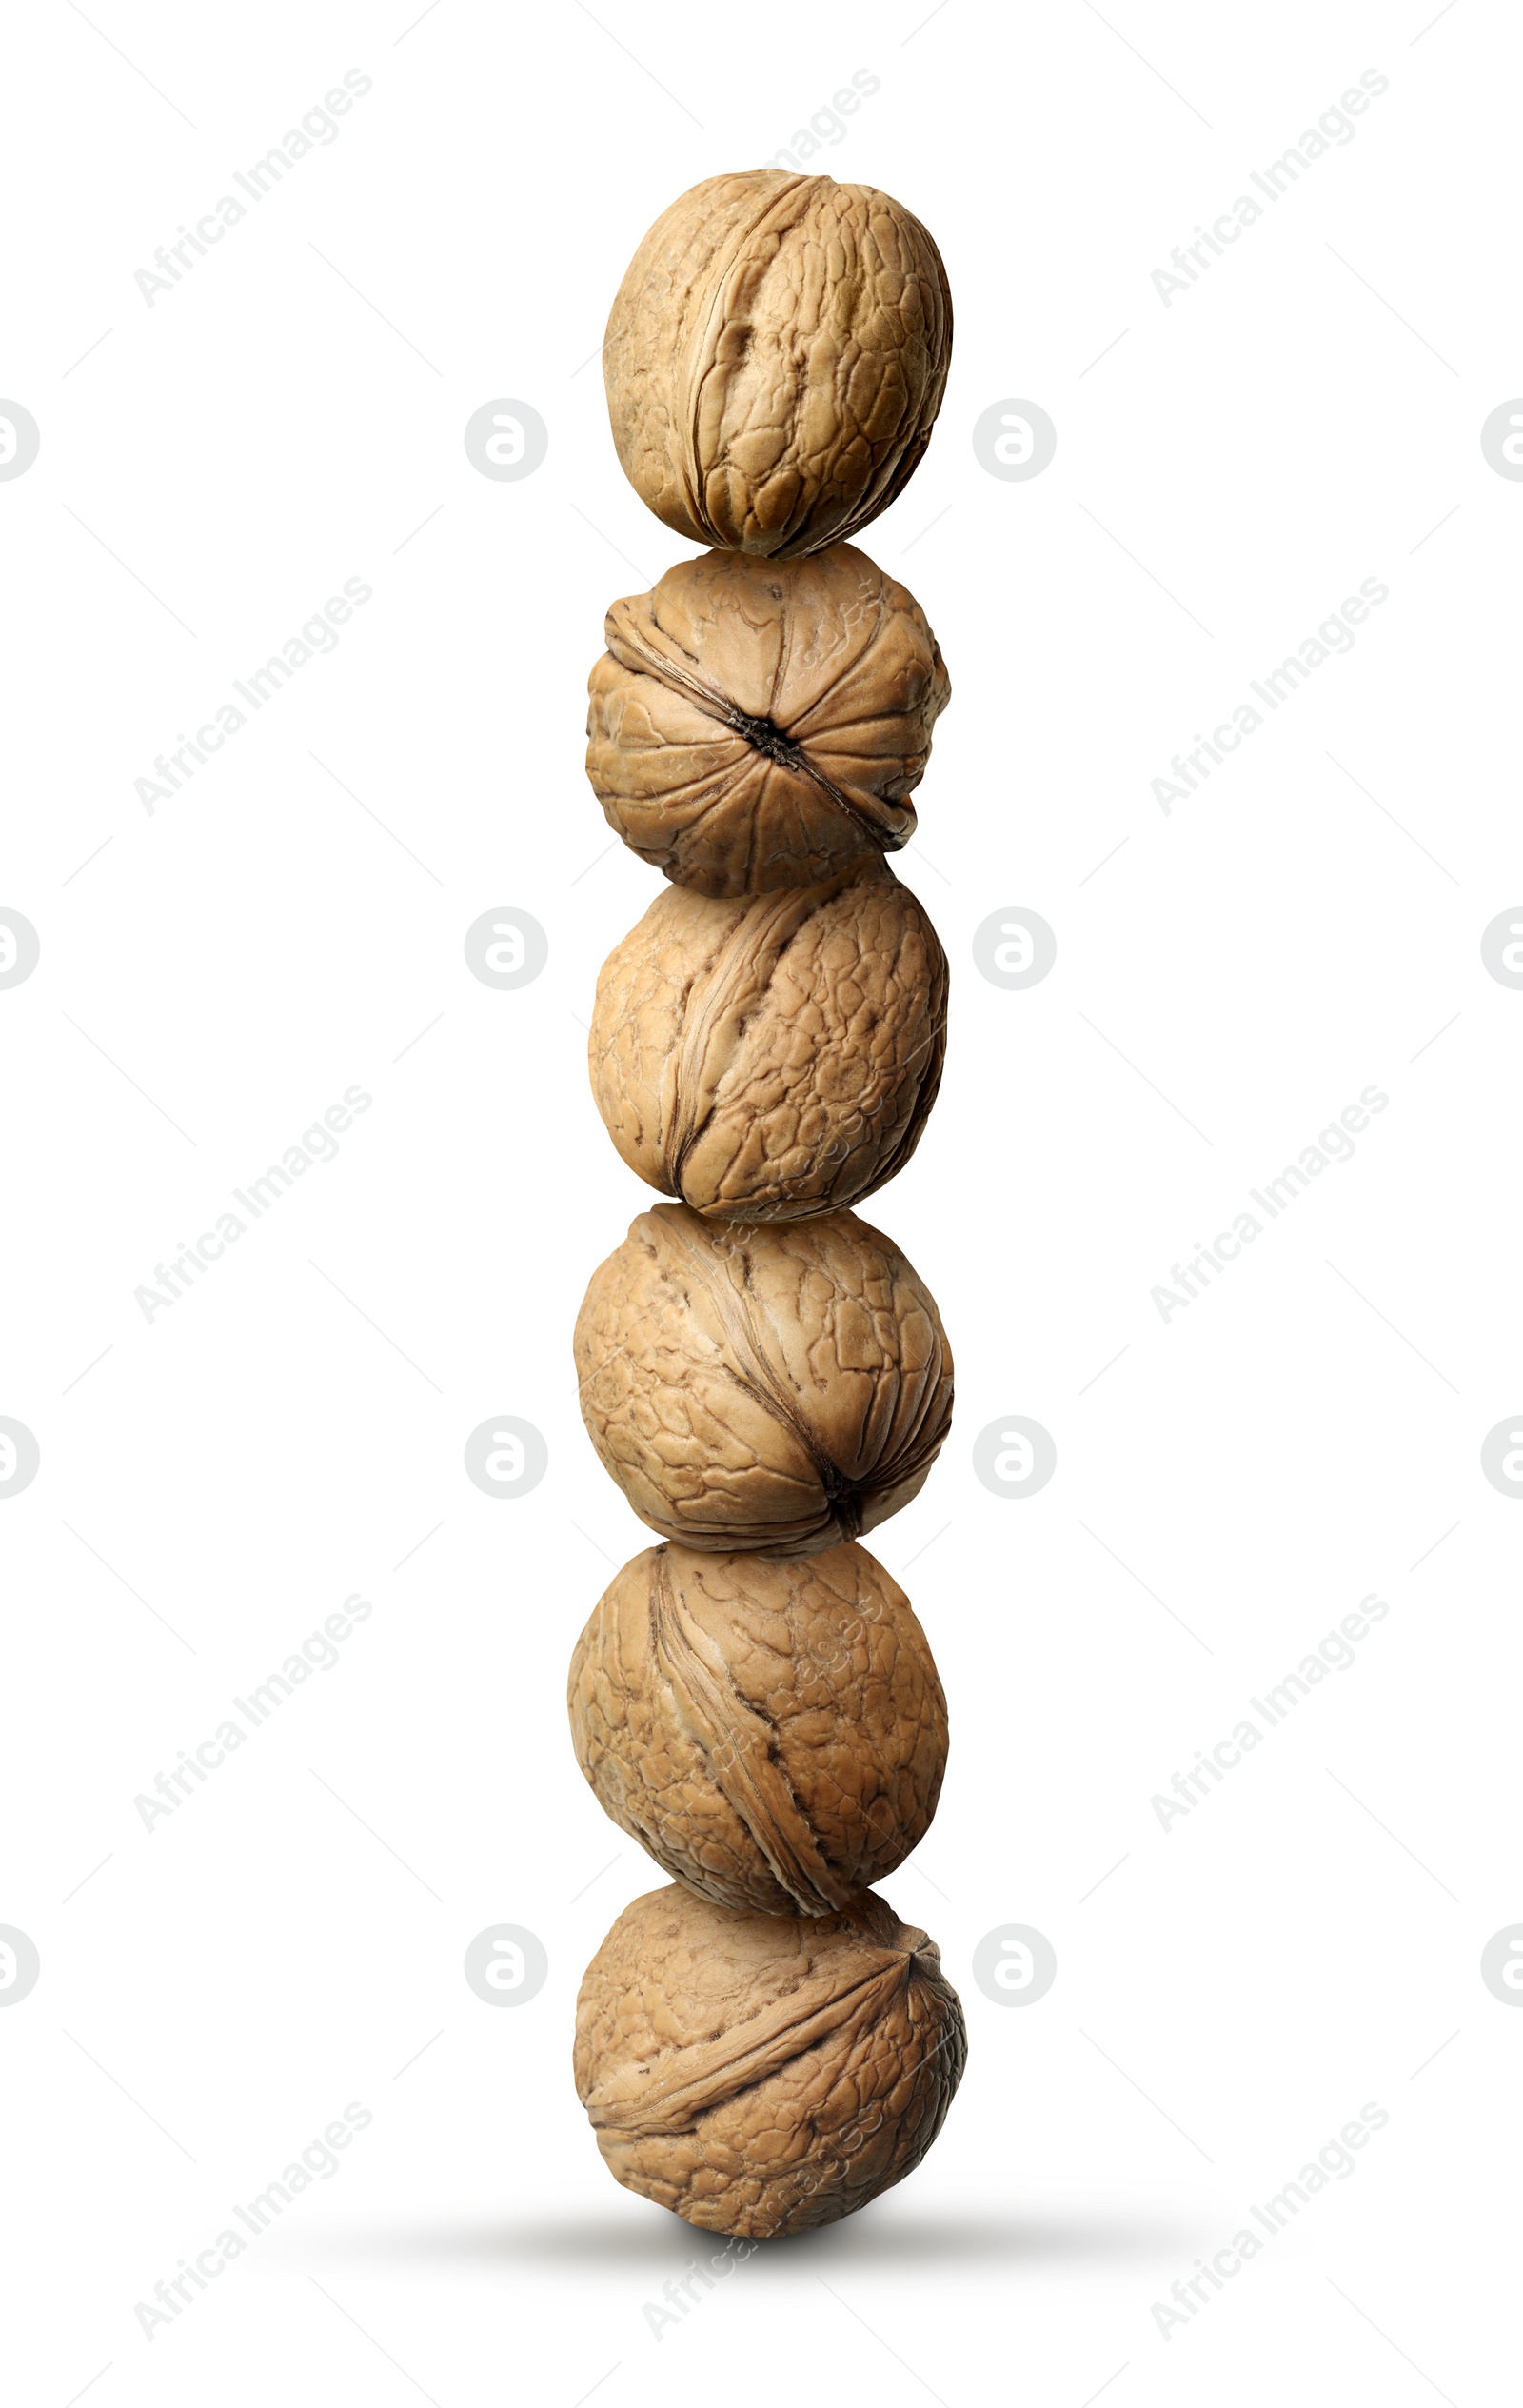 Image of Stack of many walnuts on white background